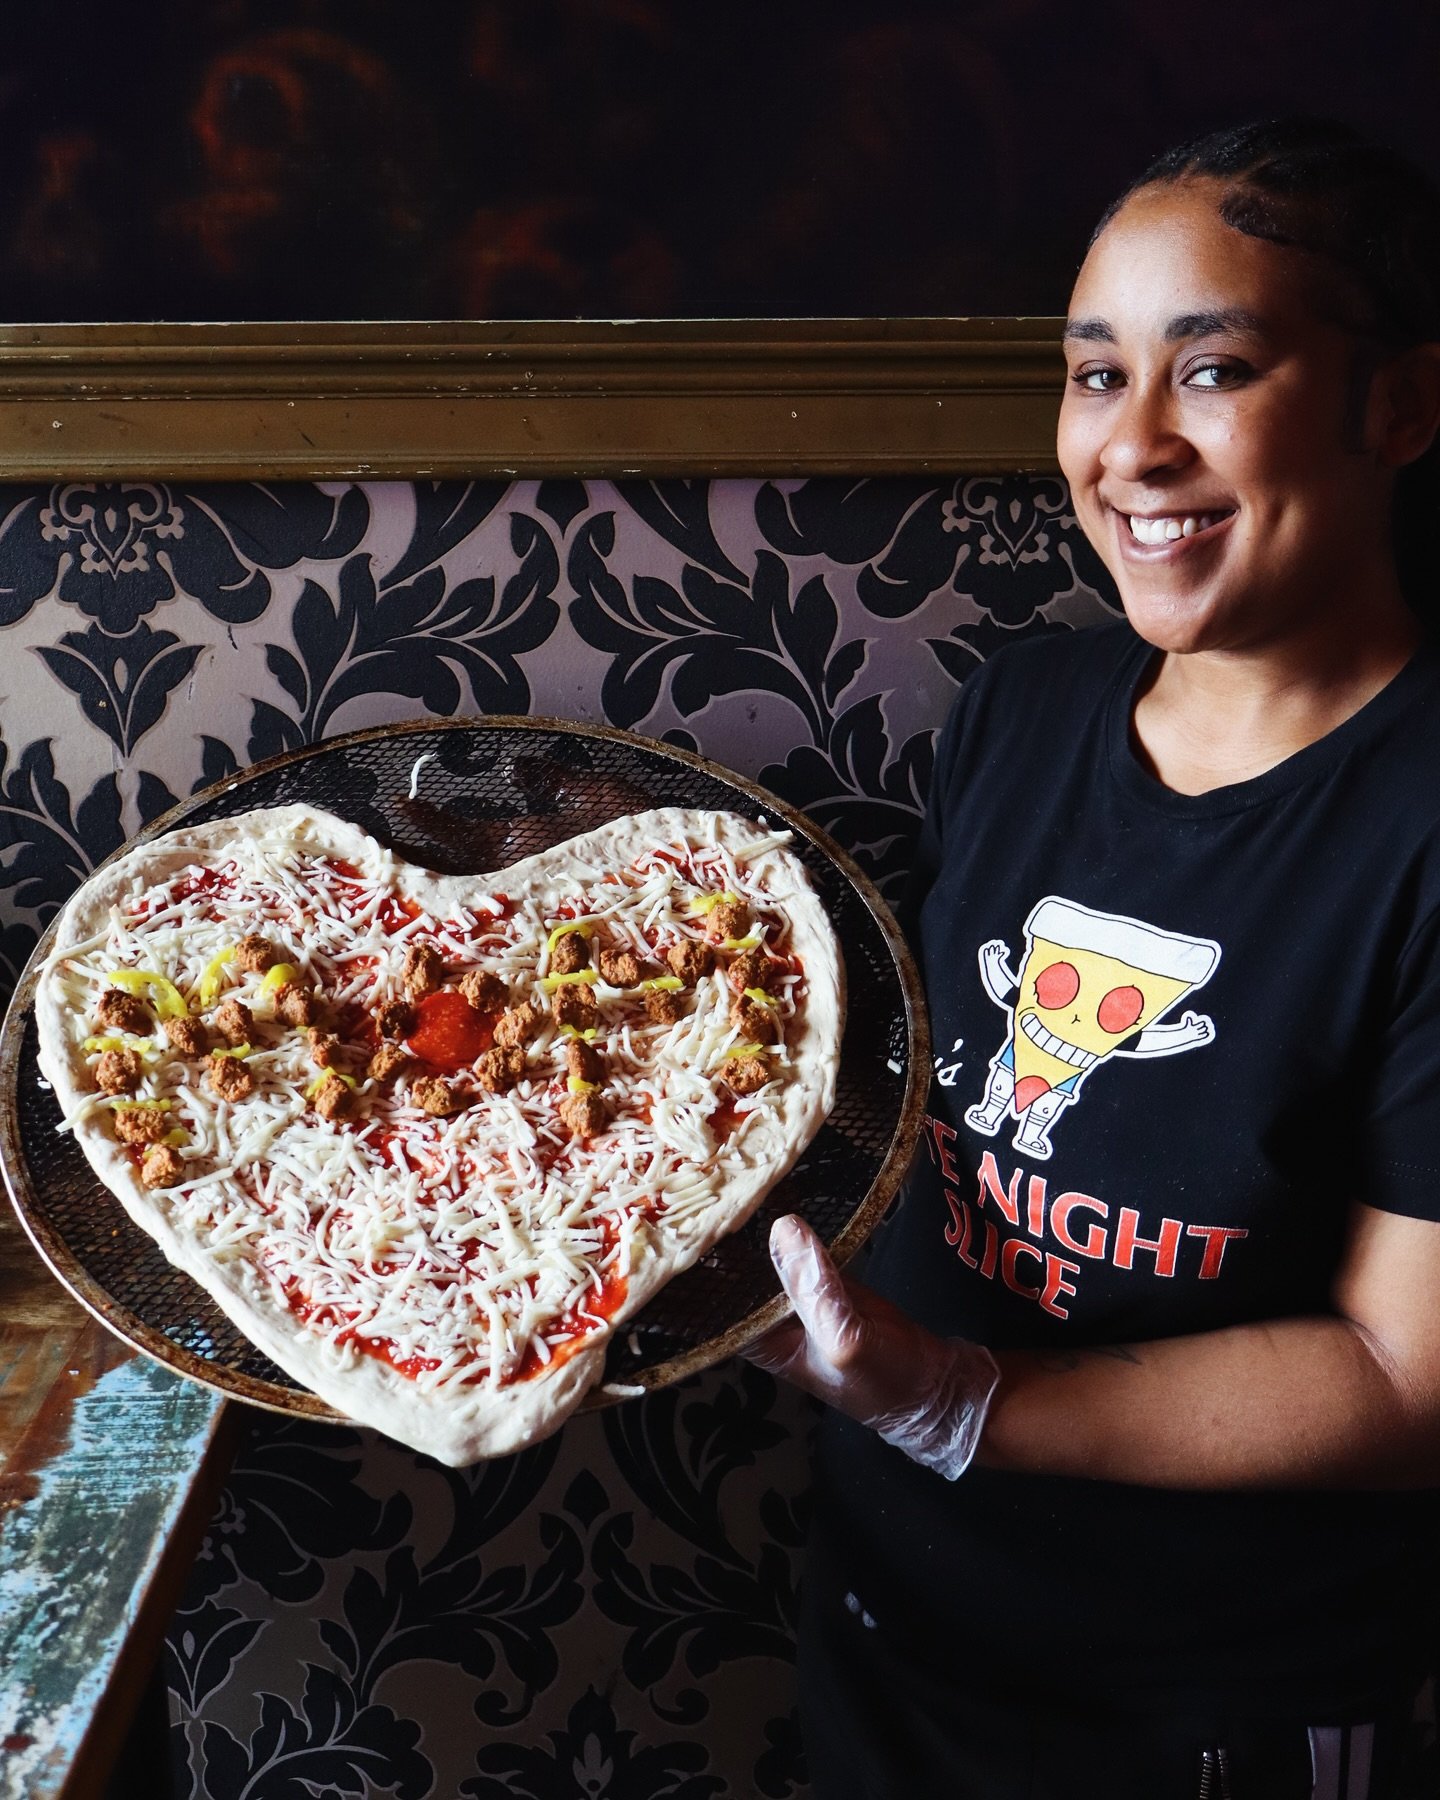 You know what&rsquo;s better than Mother&rsquo;s Day brunch? MOTHER&rsquo;S DAY PIZZA!

Treat your ma like the queen she is and order her an extra special heart-shaped pizza this #MothersDay to let her know how much you care. We&rsquo;ll even write a